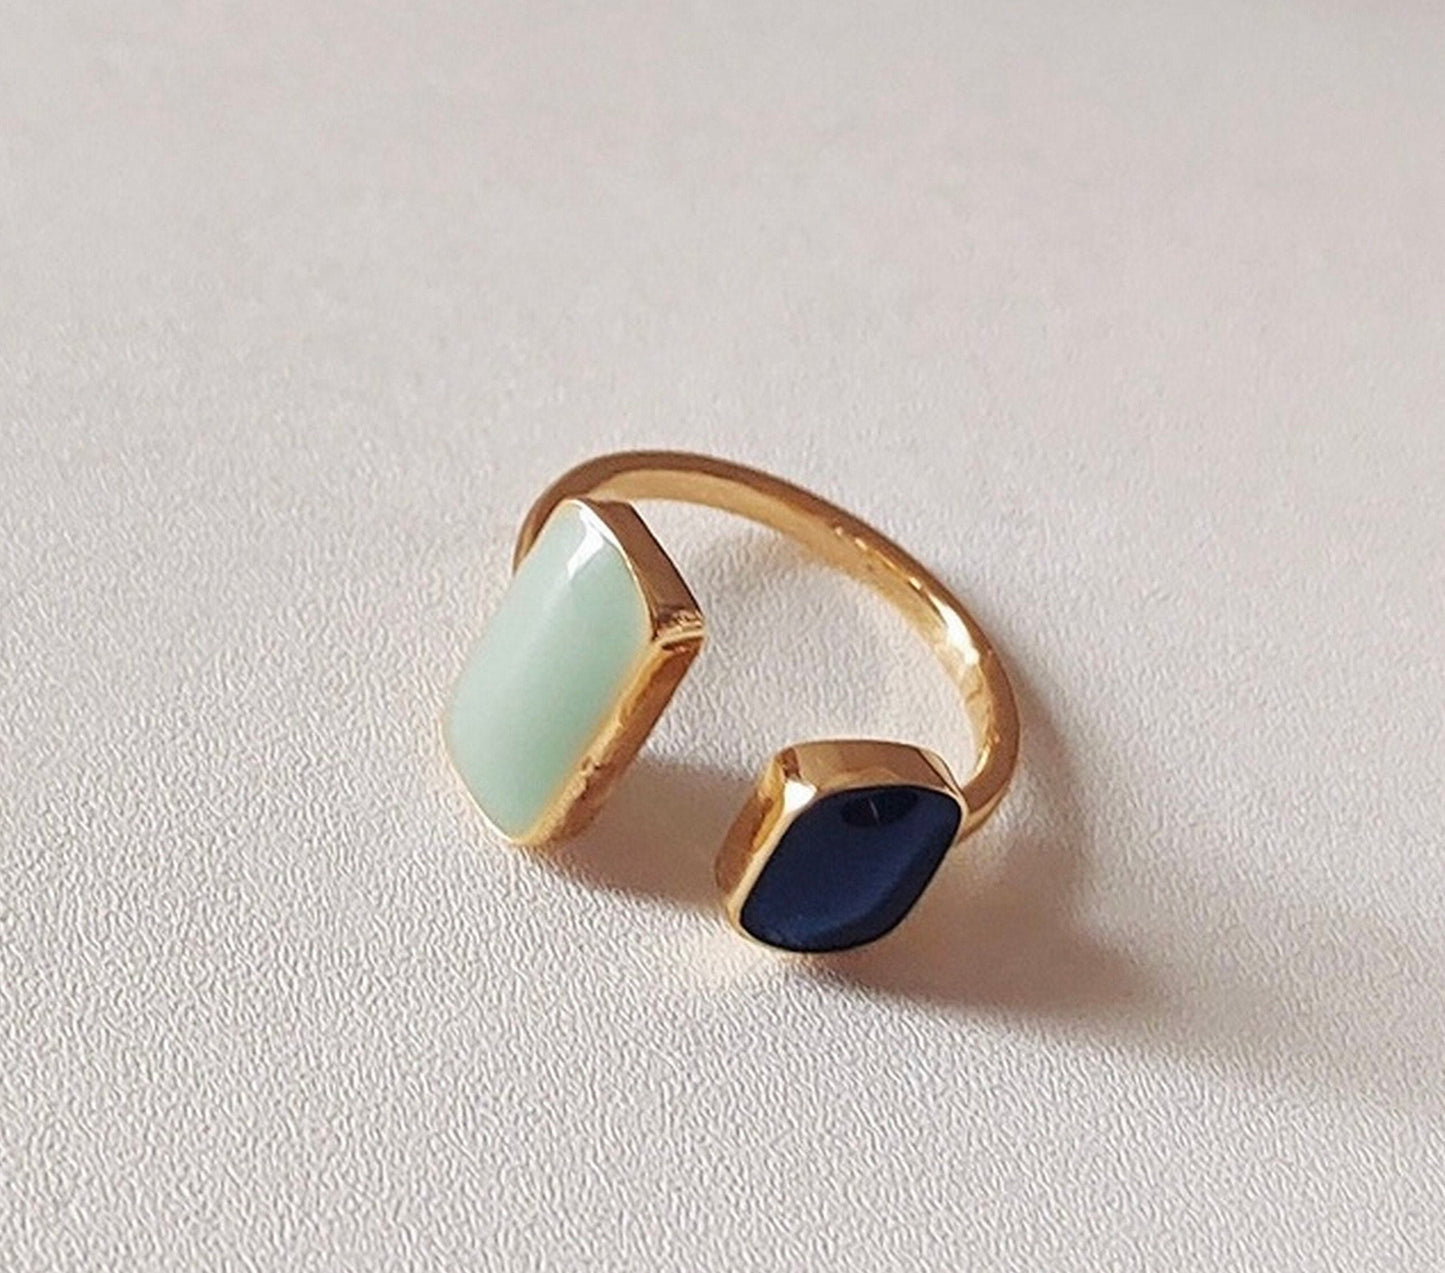 Geometric square signet ring, Blue rings, Avant Garde cocktail ring, Unisex mens rings, Gold open ring, Chunky rings, Unique birthday gift